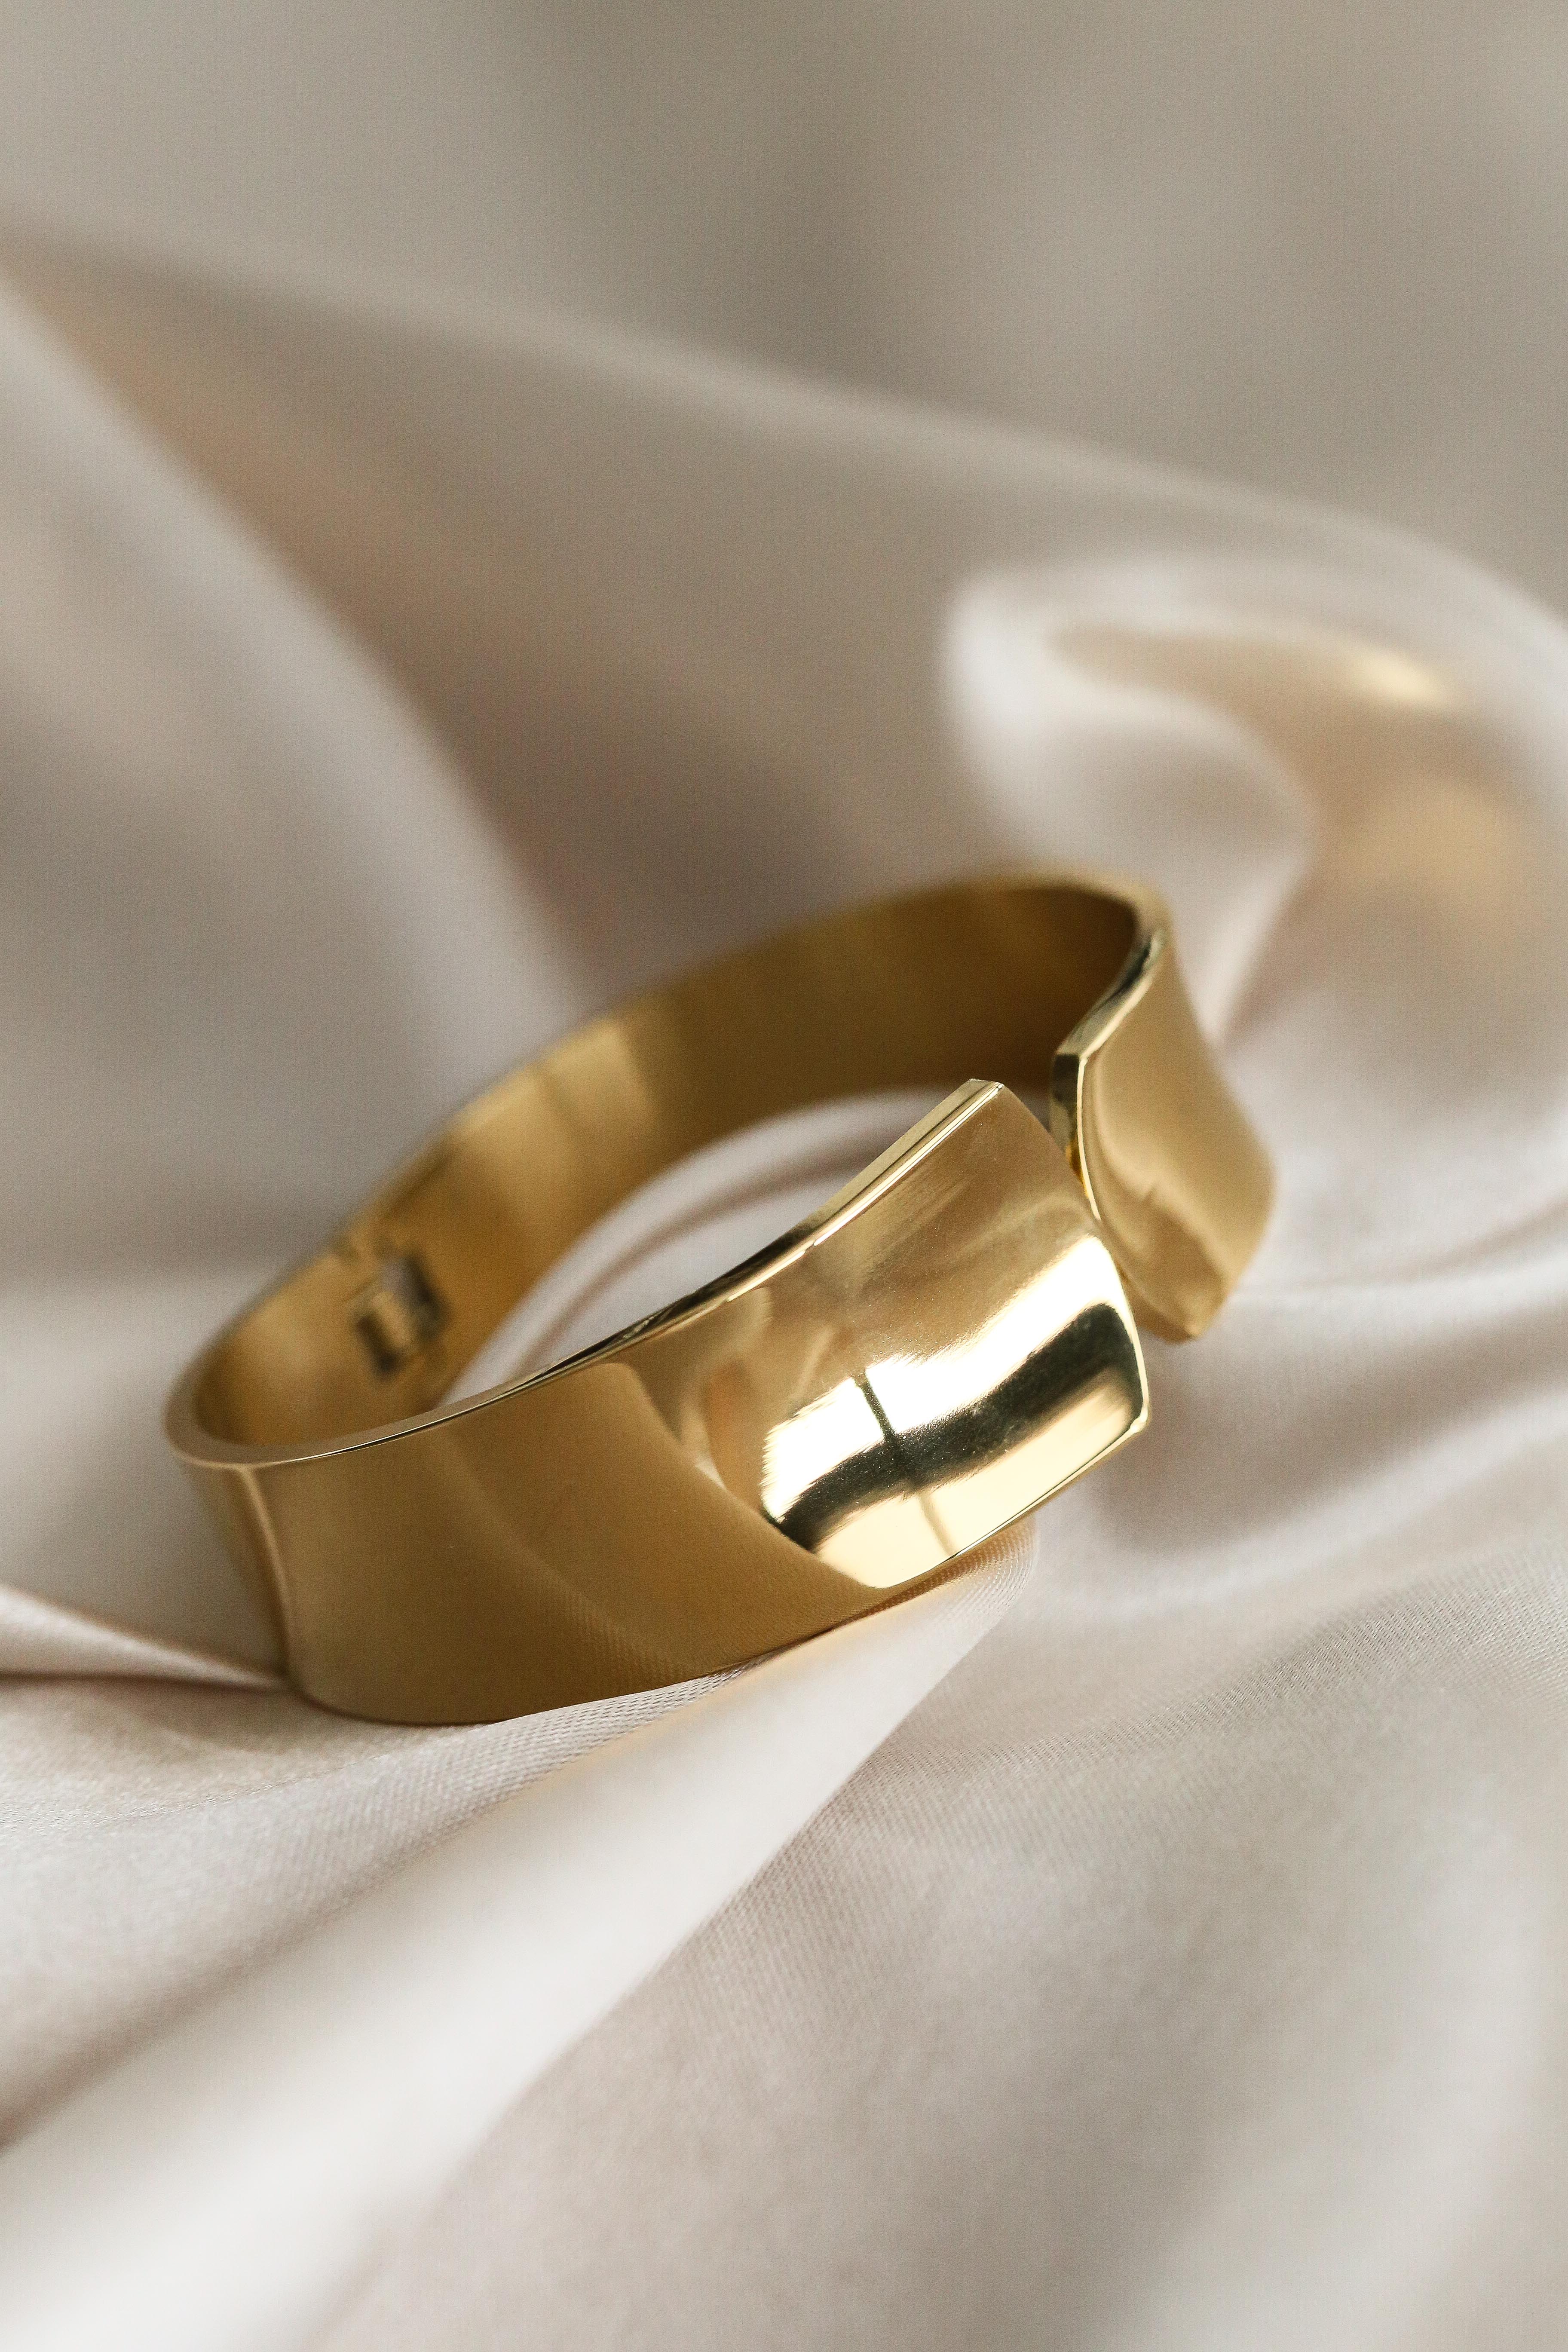 Alessia Cuff - Boutique Minimaliste has waterproof, durable, elegant and vintage inspired jewelry